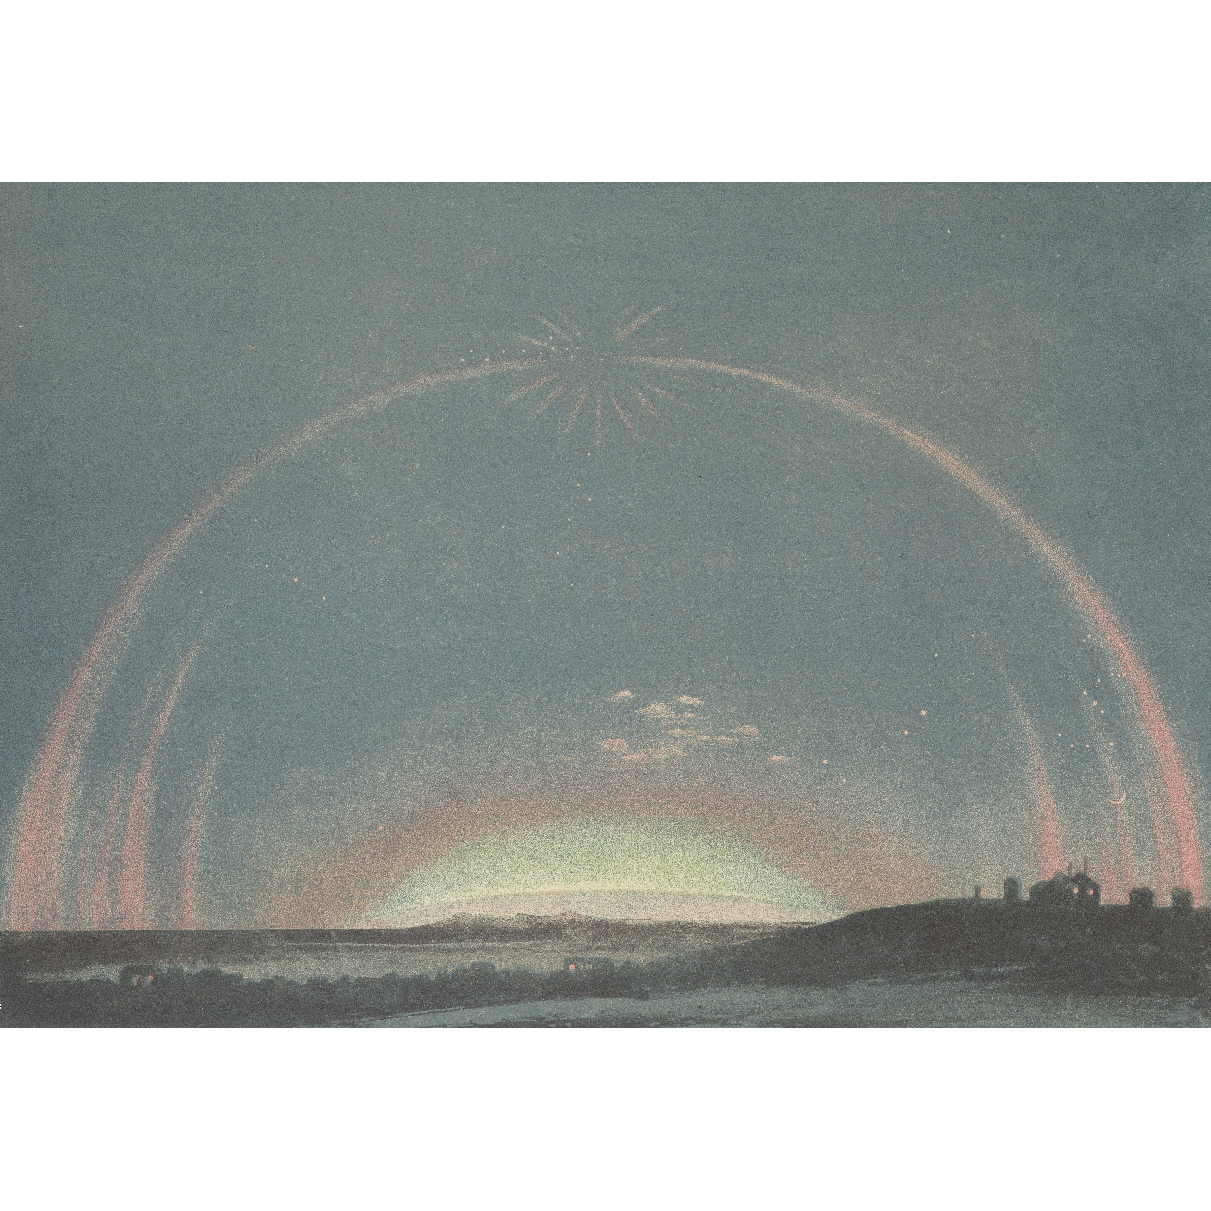 Greeting card - landscape format. Meteorological illustration of grey/blue sky, with a pink arch and glowing light over a flat landscape. From the collection of Cambridge University Library, brought to you by CuratingCambridge.com